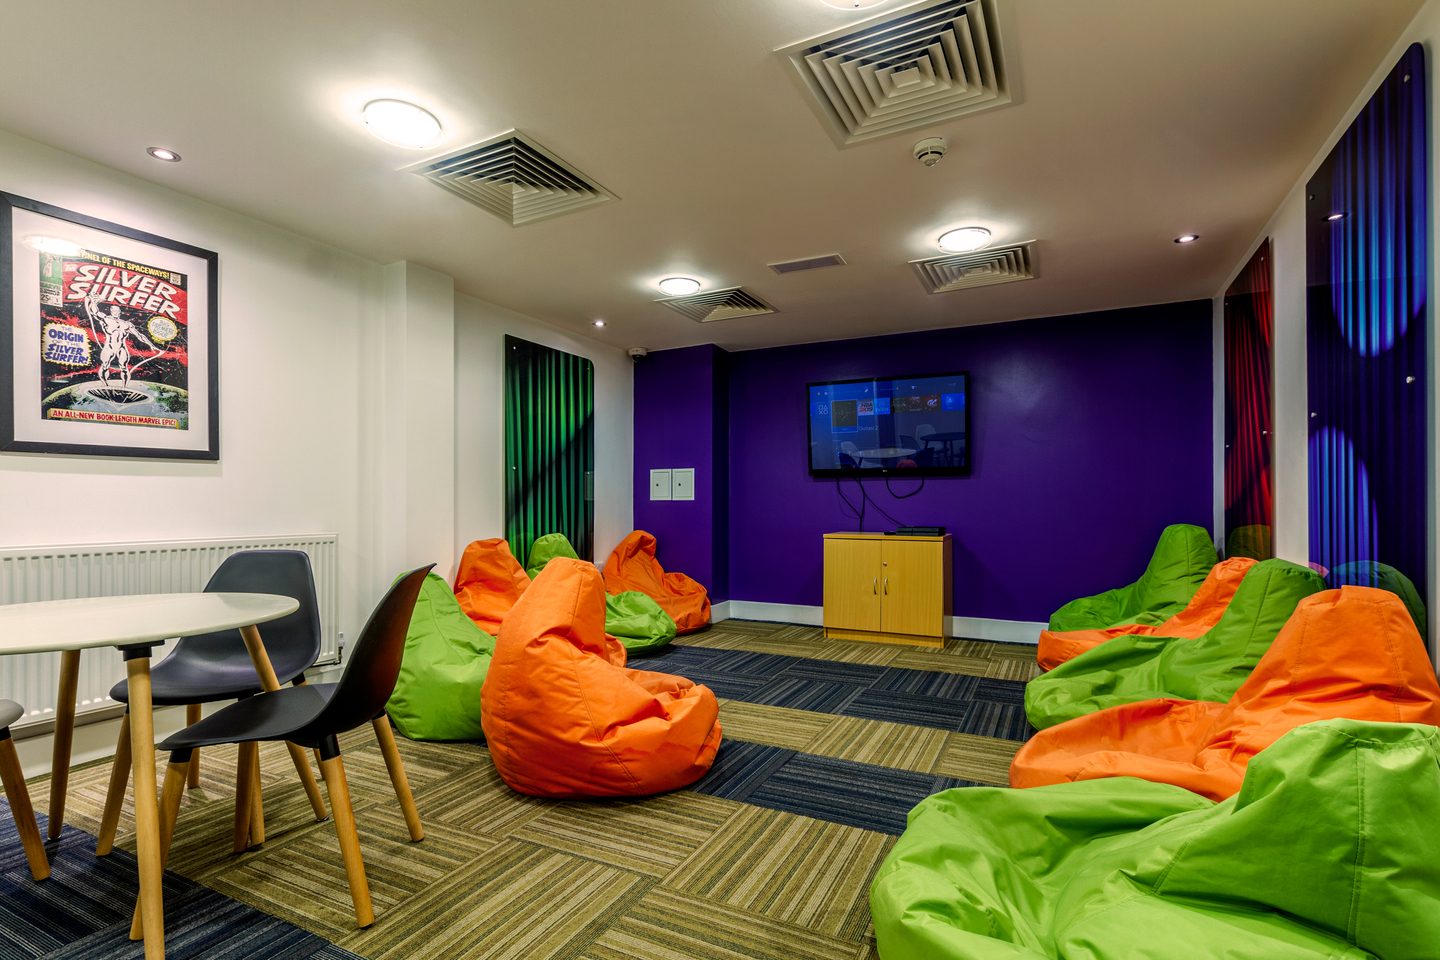 Shared area with a television, a table, chairs and beanbags